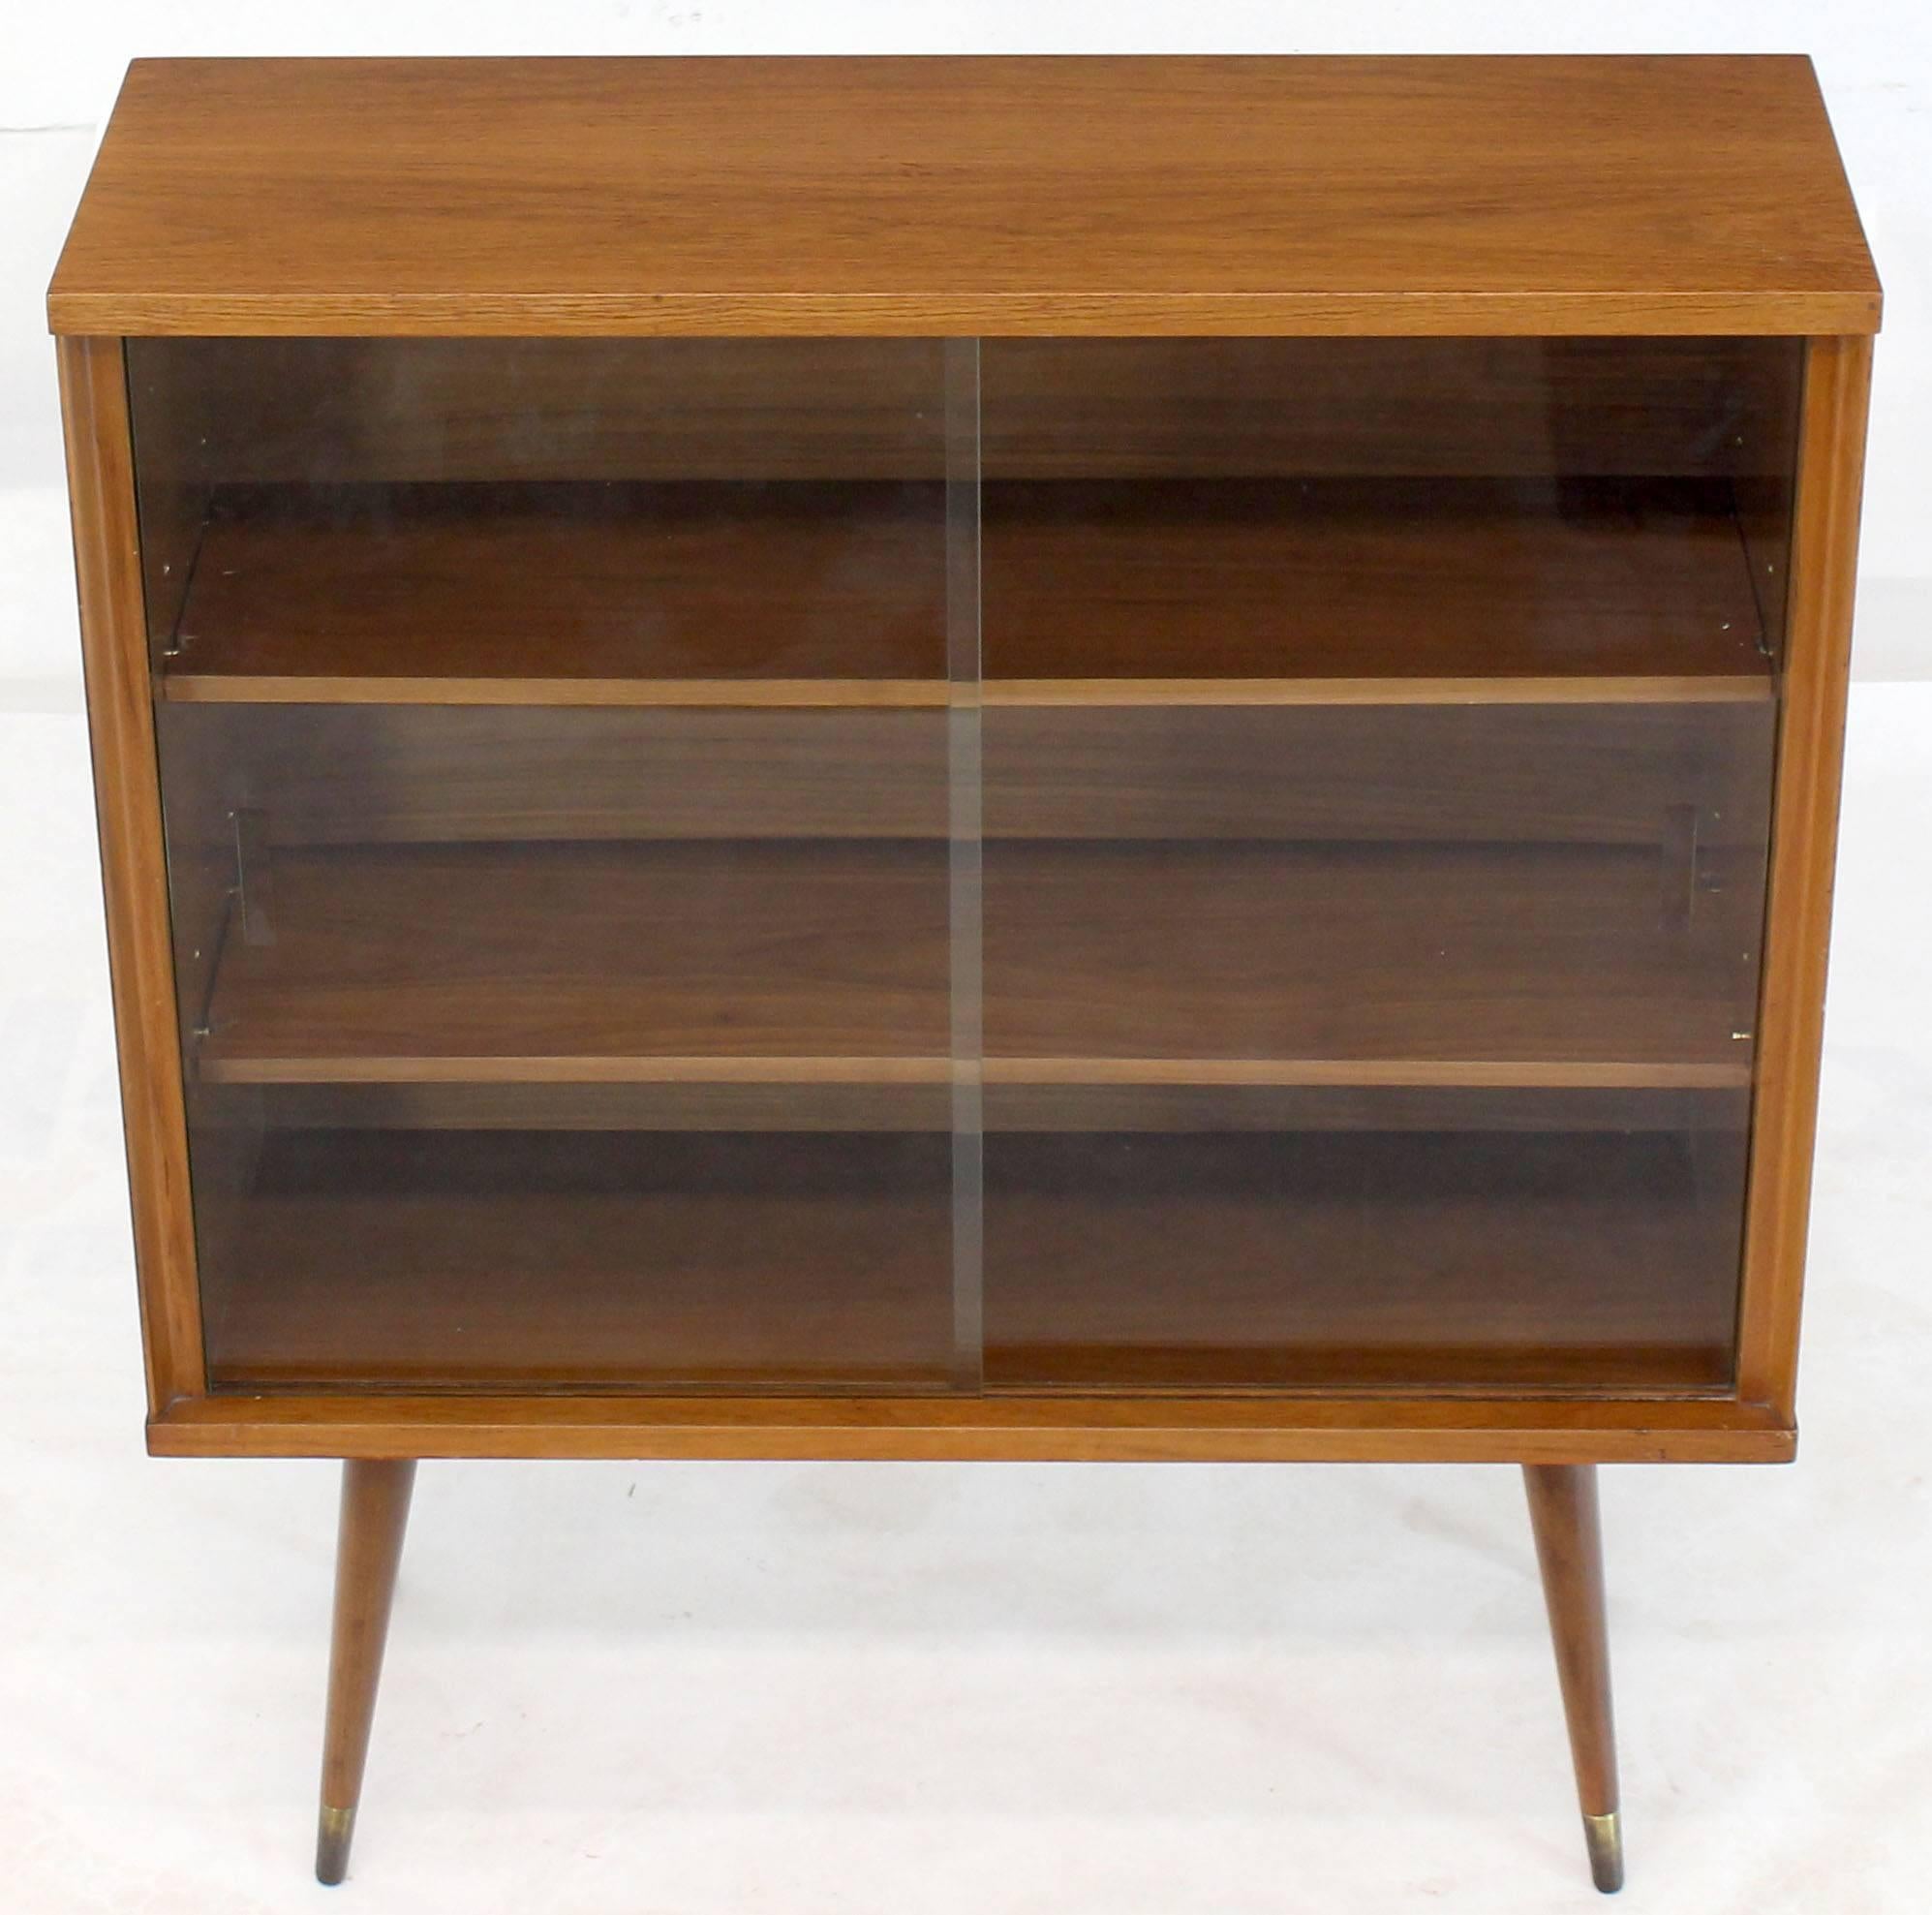 Small Mid-Century Modern bookcase with adjustable shelves and glass sliding doors floating on dowel legs.